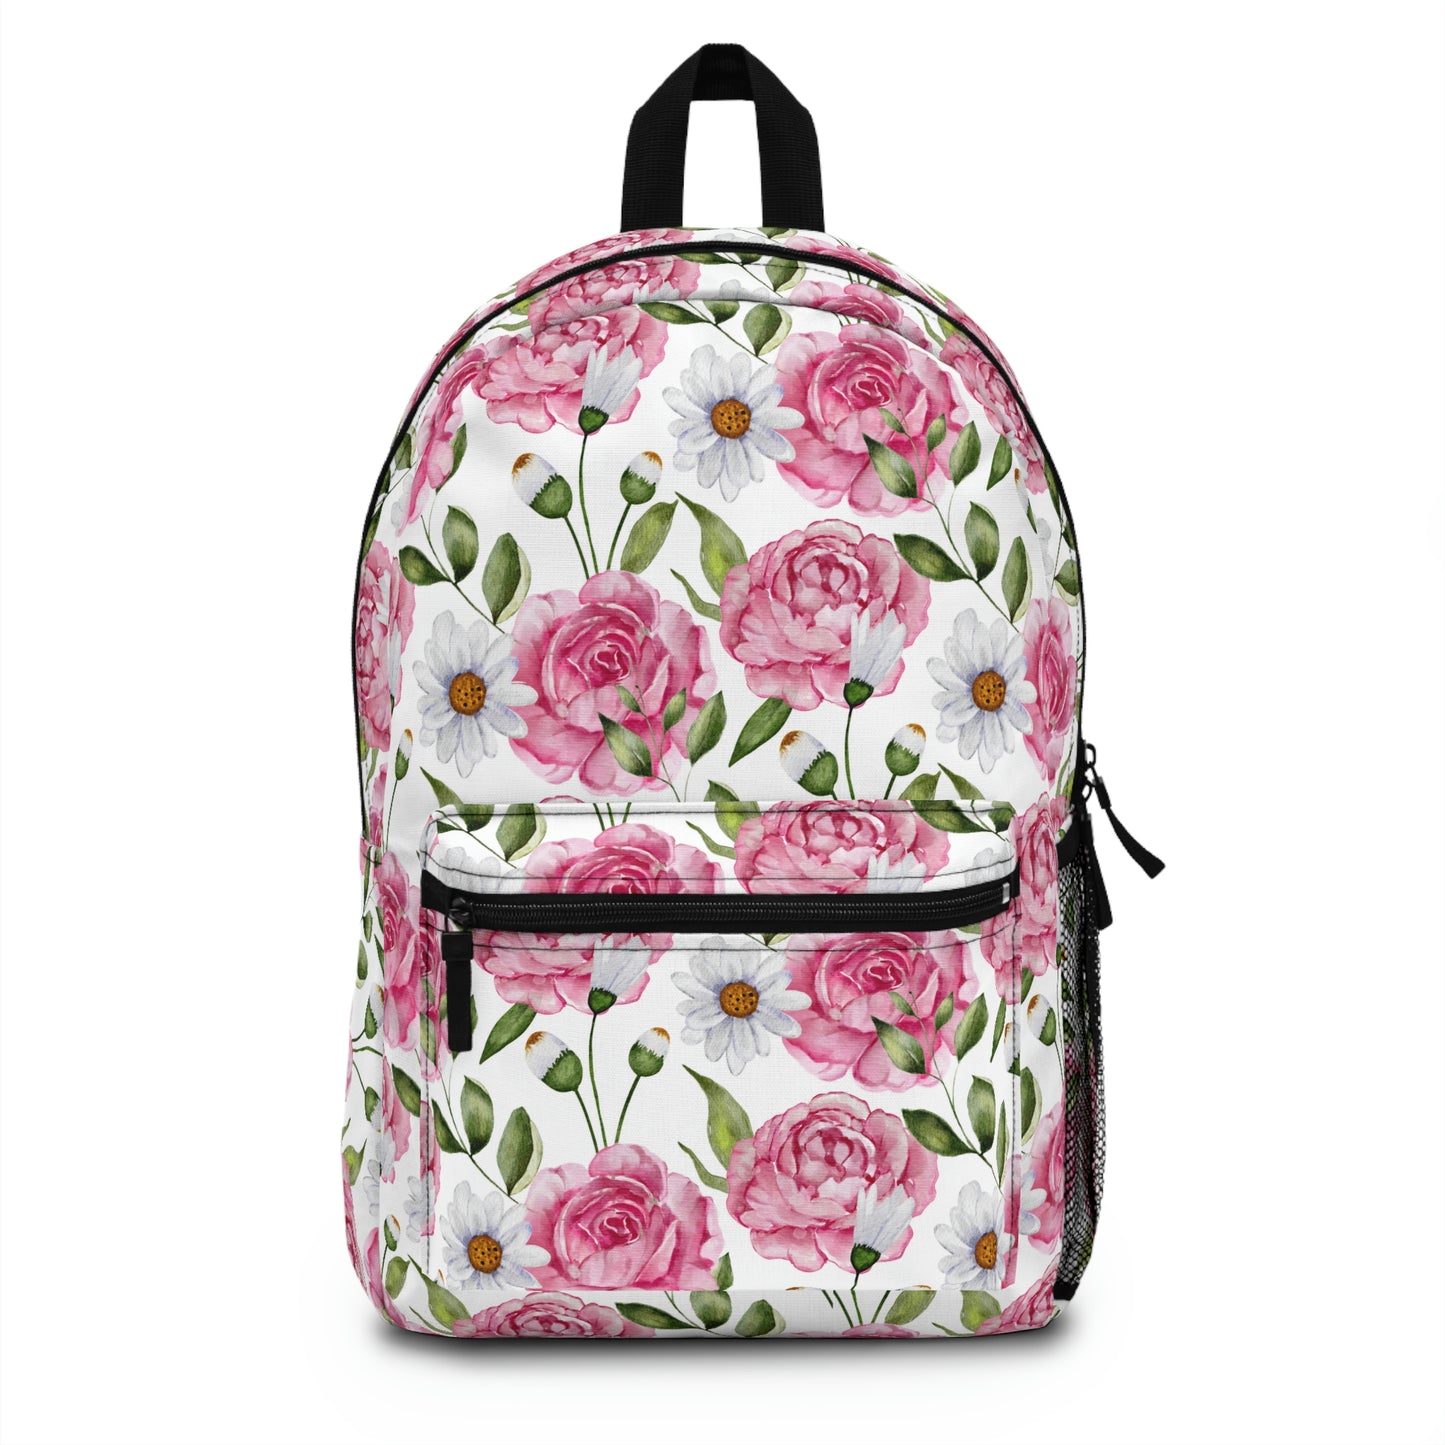 pink rose and white daisy print backpack